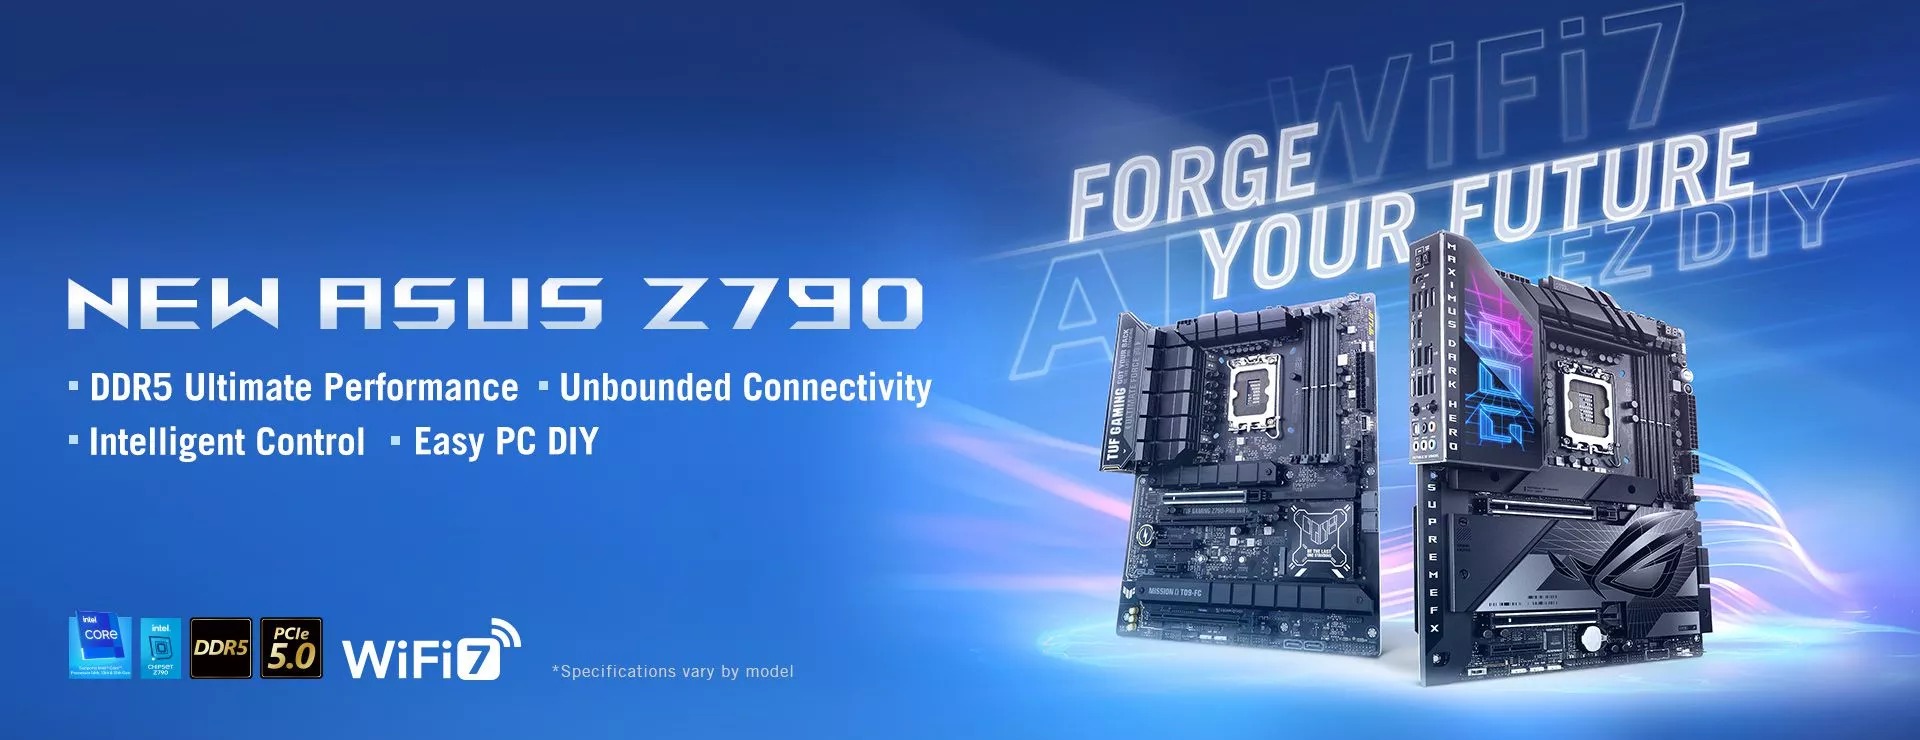 New ASUS Z790 WiFi 7  Image of 2 Motherboards